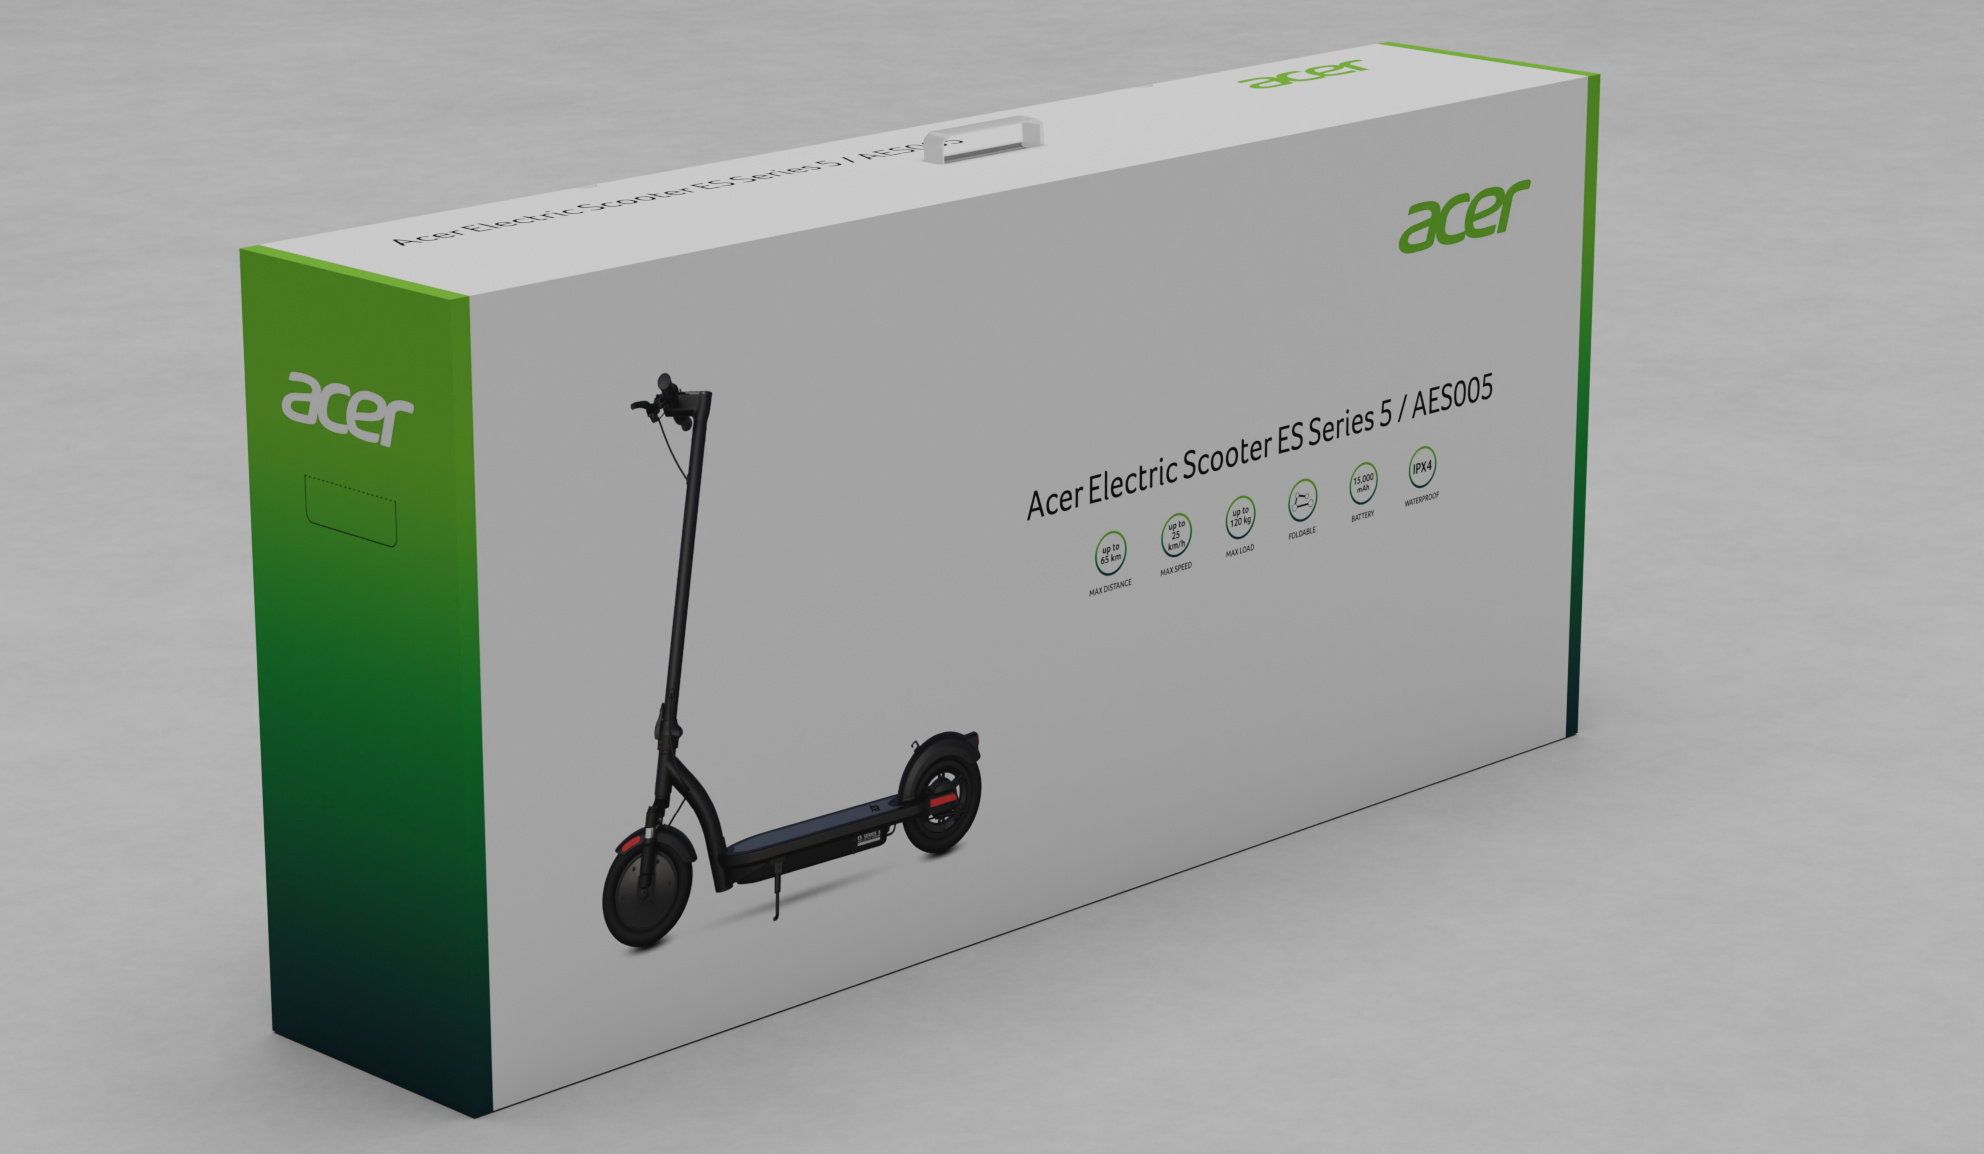 Acer electric scooter series 5. Электросамокат Acer. Электросамокат Acer Electric Scooter es Series 5 aes005. Электросамокат Hoverbot BS-02. Aes001 Acer электросамокат.